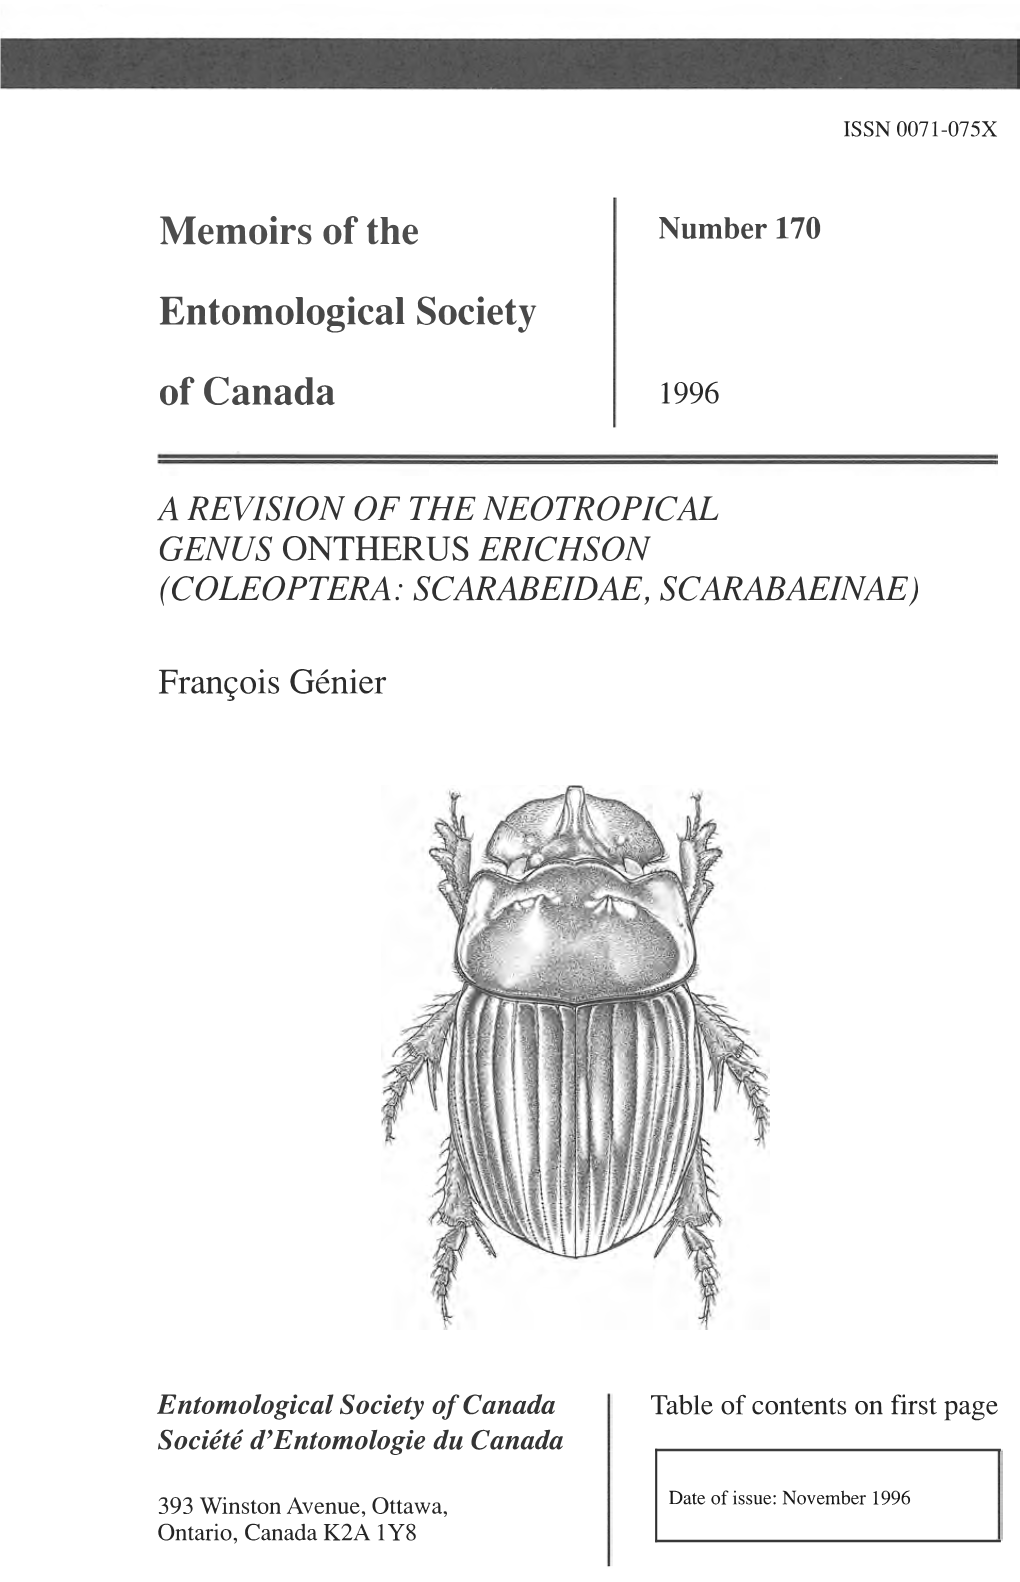 Memoirs of the Entomological Society of Canada a REVISION OF